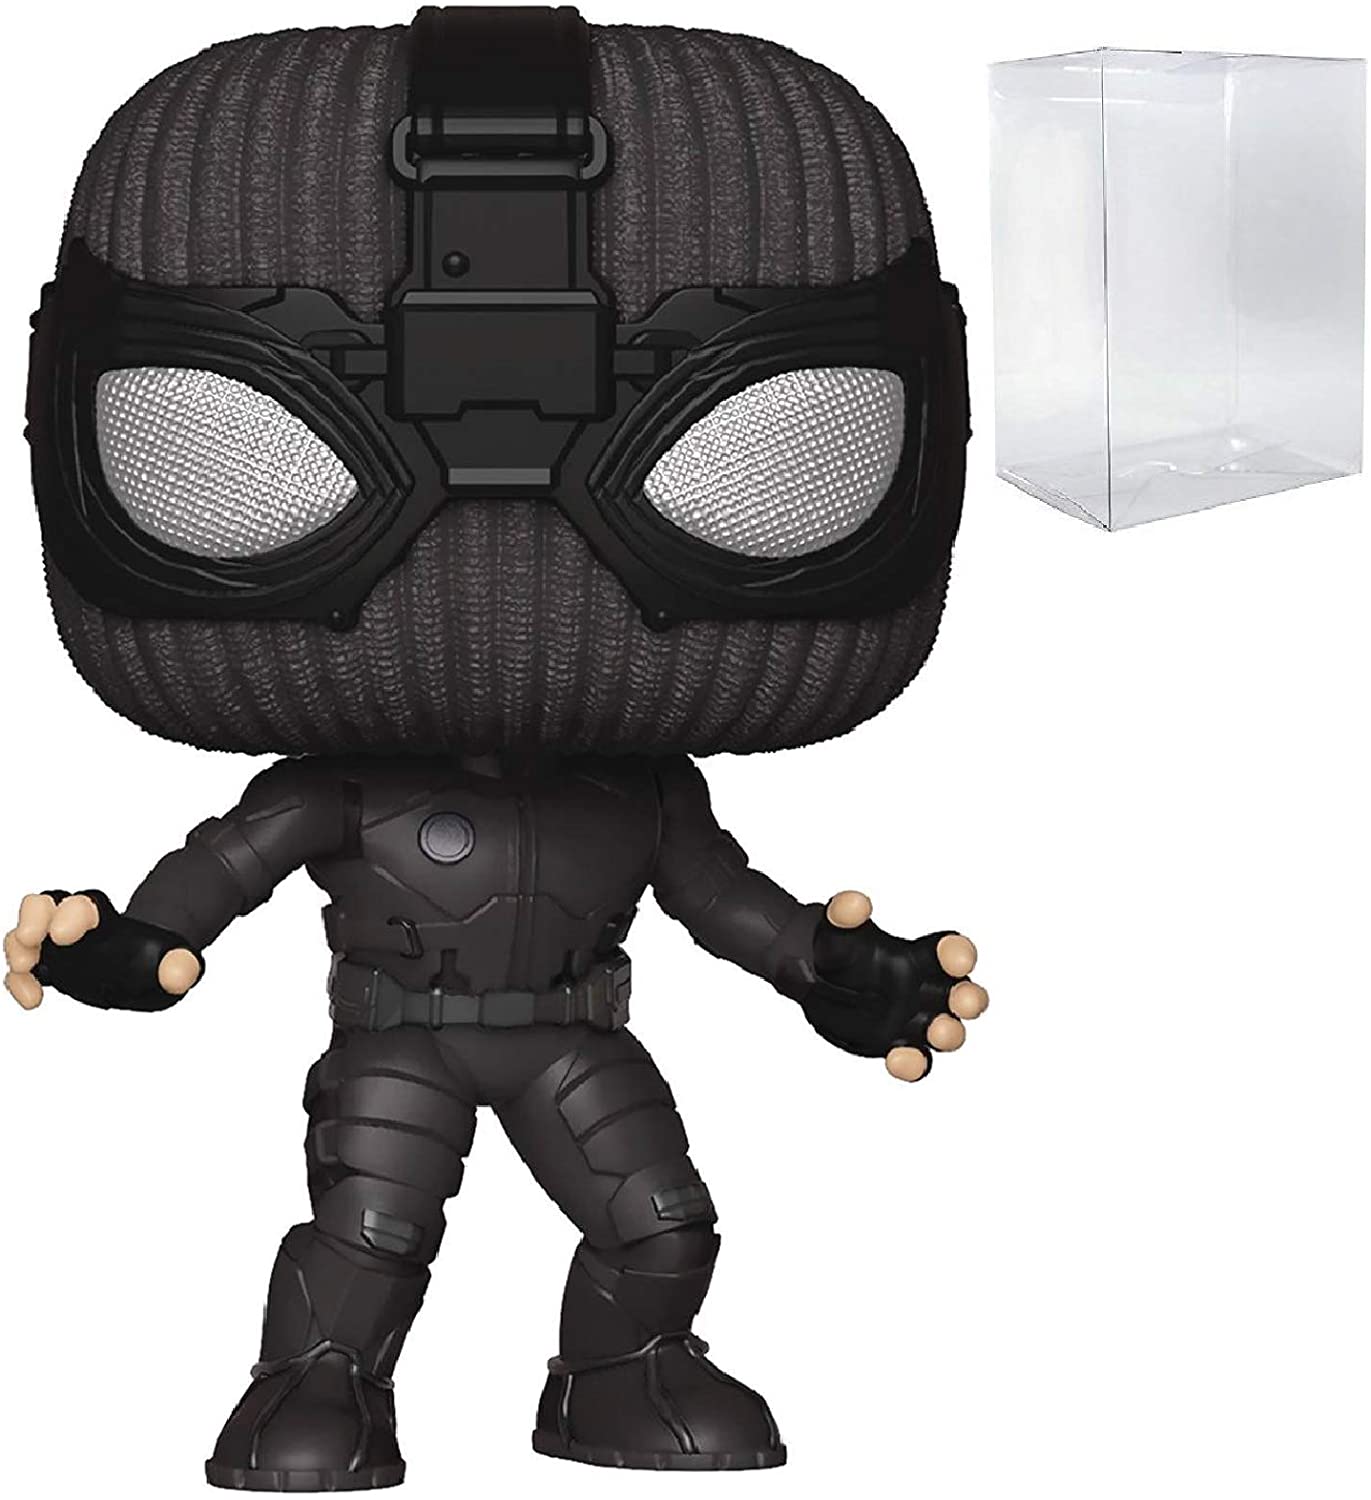 Marvel: Spider Man Far From Home Suit Spider Man Funko Pop! Vinyl Figure (Includes Compatible Pop Box Protector Case): Toys & Games